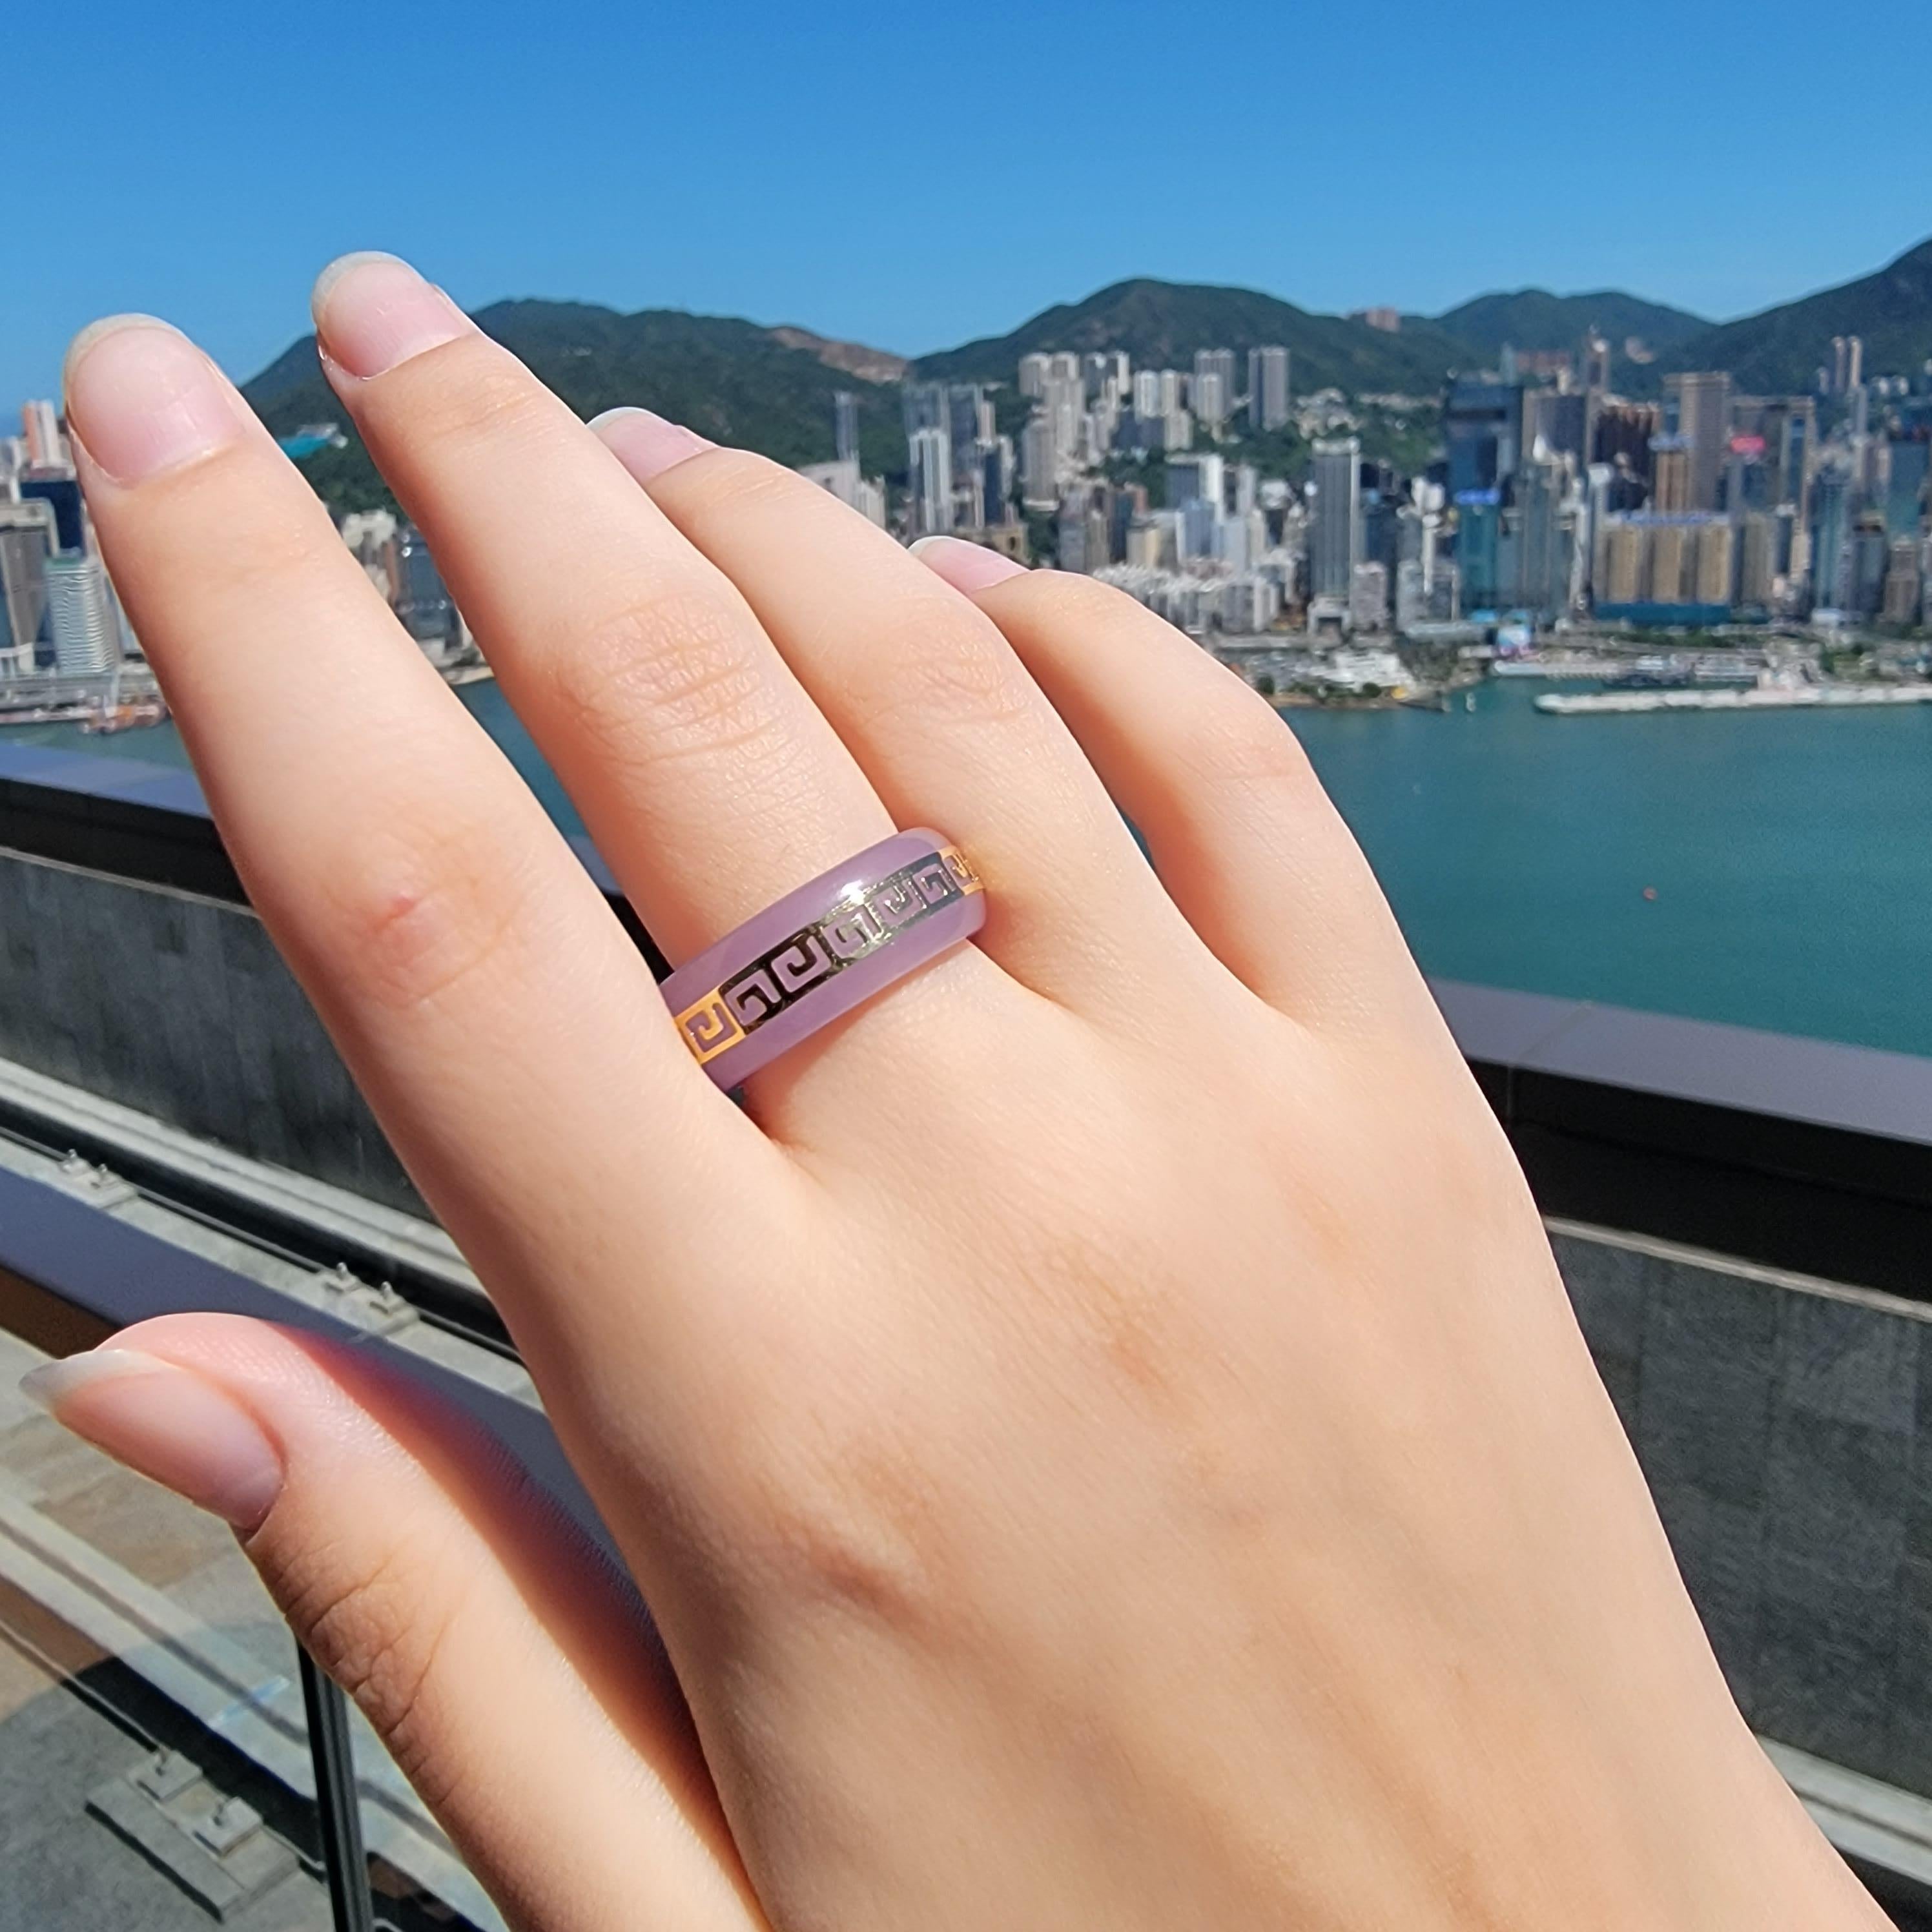 Purple Jade Band Ring with solid 14K Yellow Gold (Hallmark Stamped) for men and women (unisex). 

The infinity band style is perfect for casual and formal wear, easy to dress up. 

The 'Li' rings are named after the Chinese character for Strength.